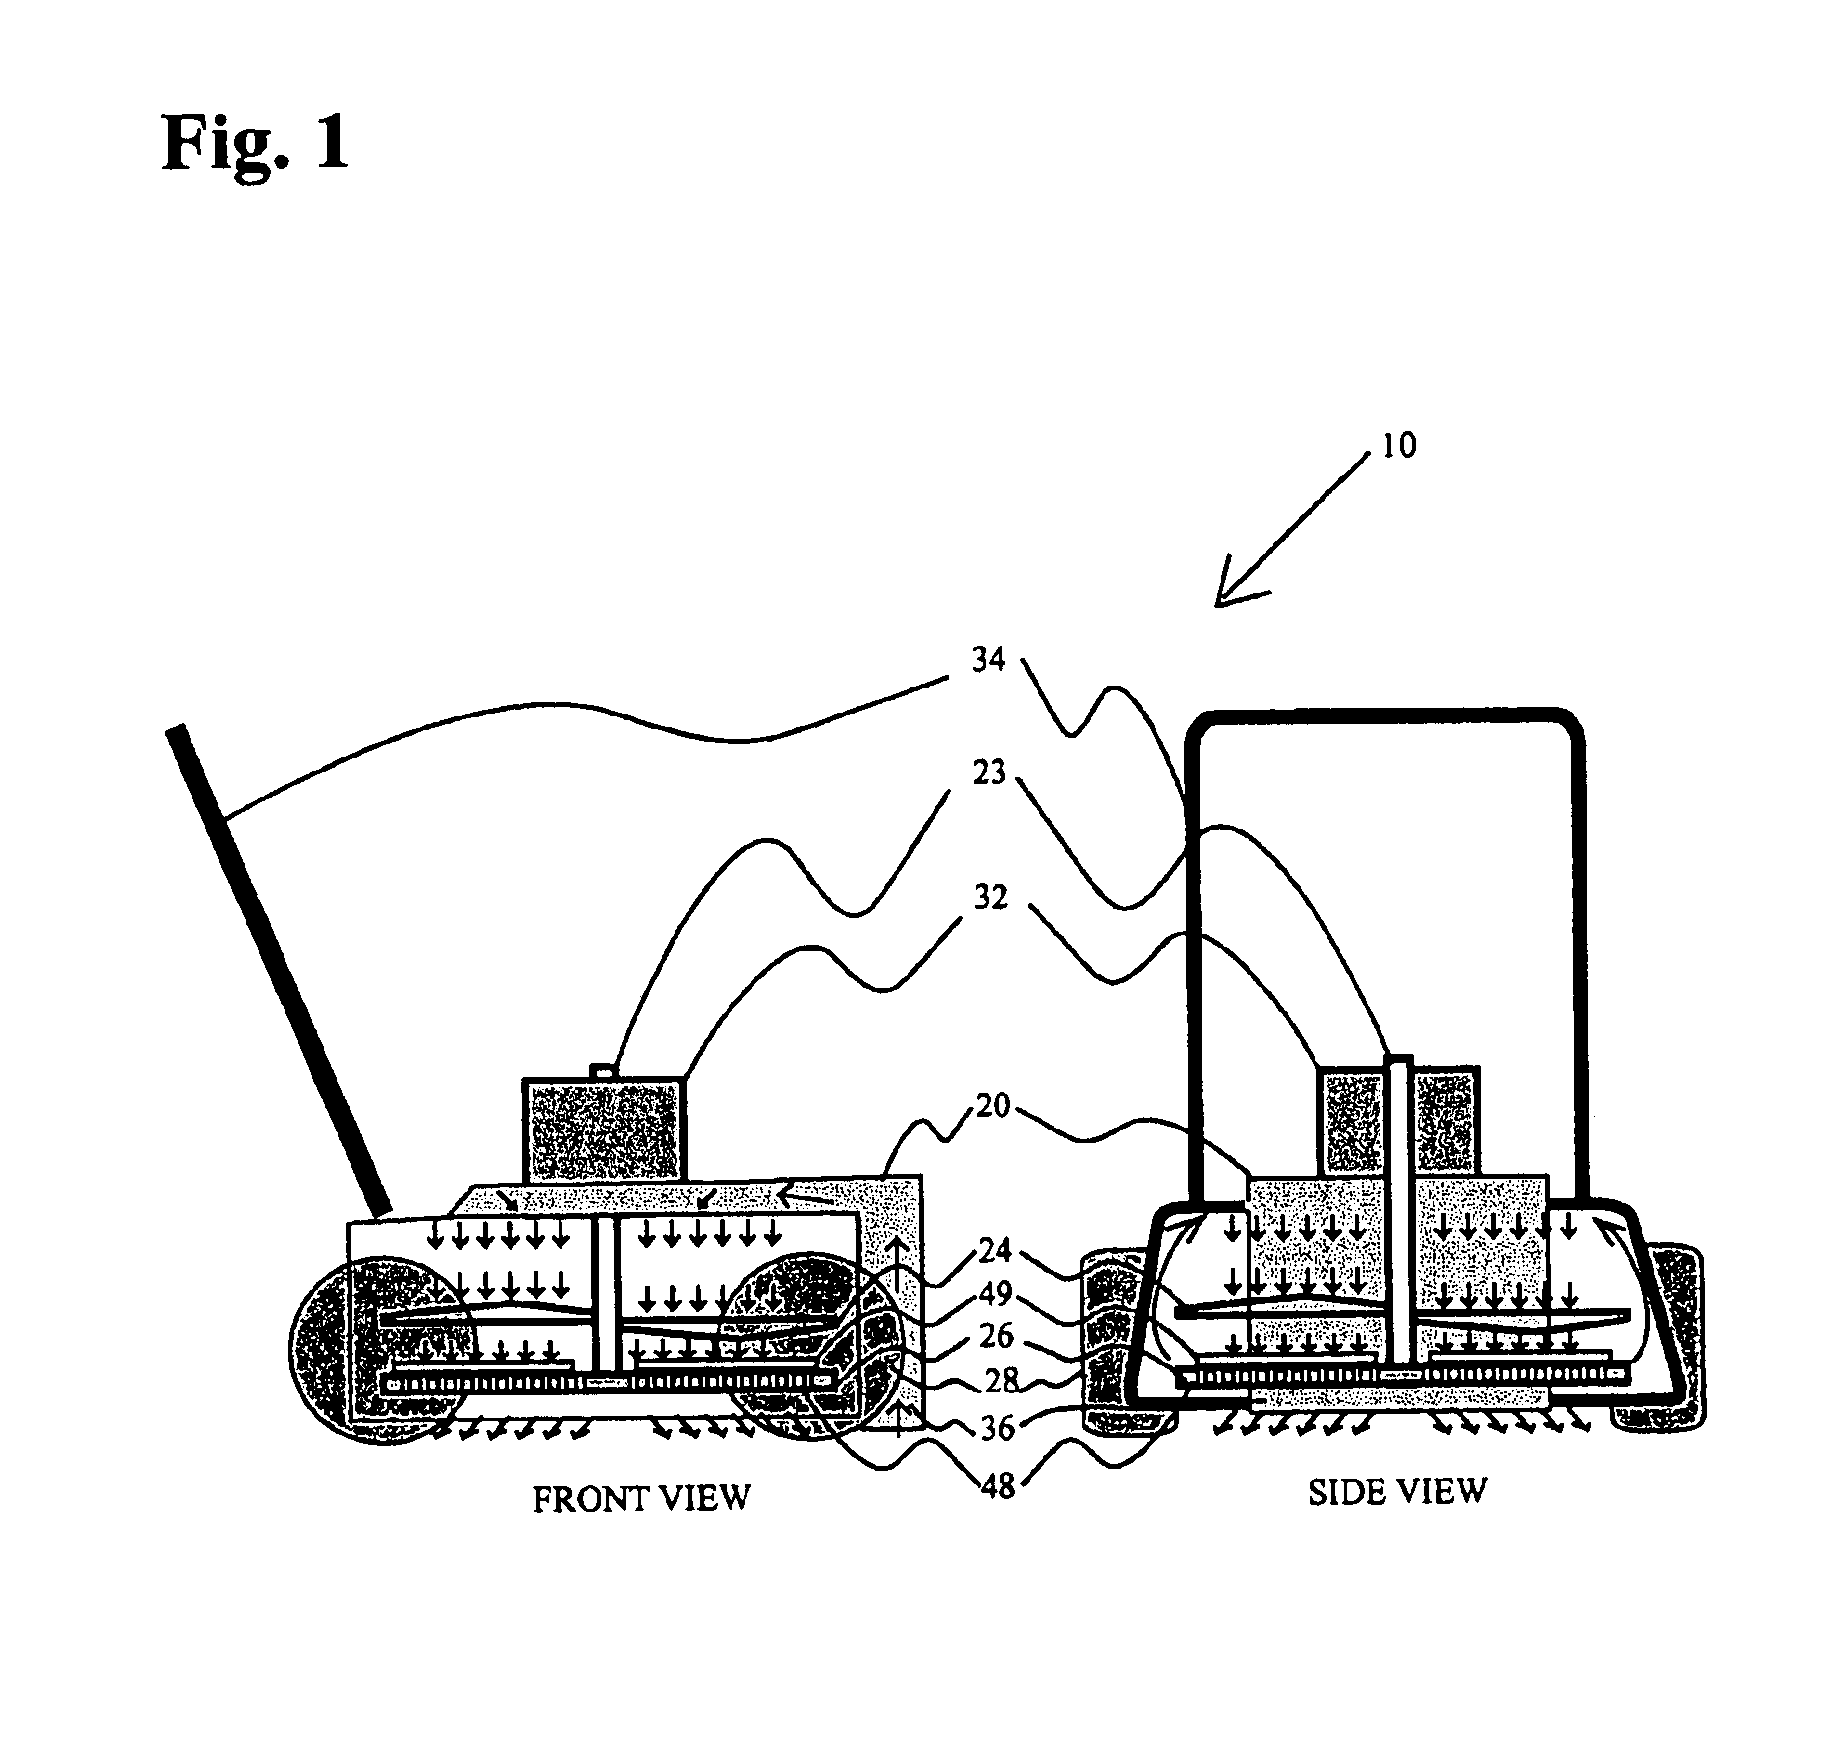 Apparatus for fine pulverization of dry leaves and garden debris